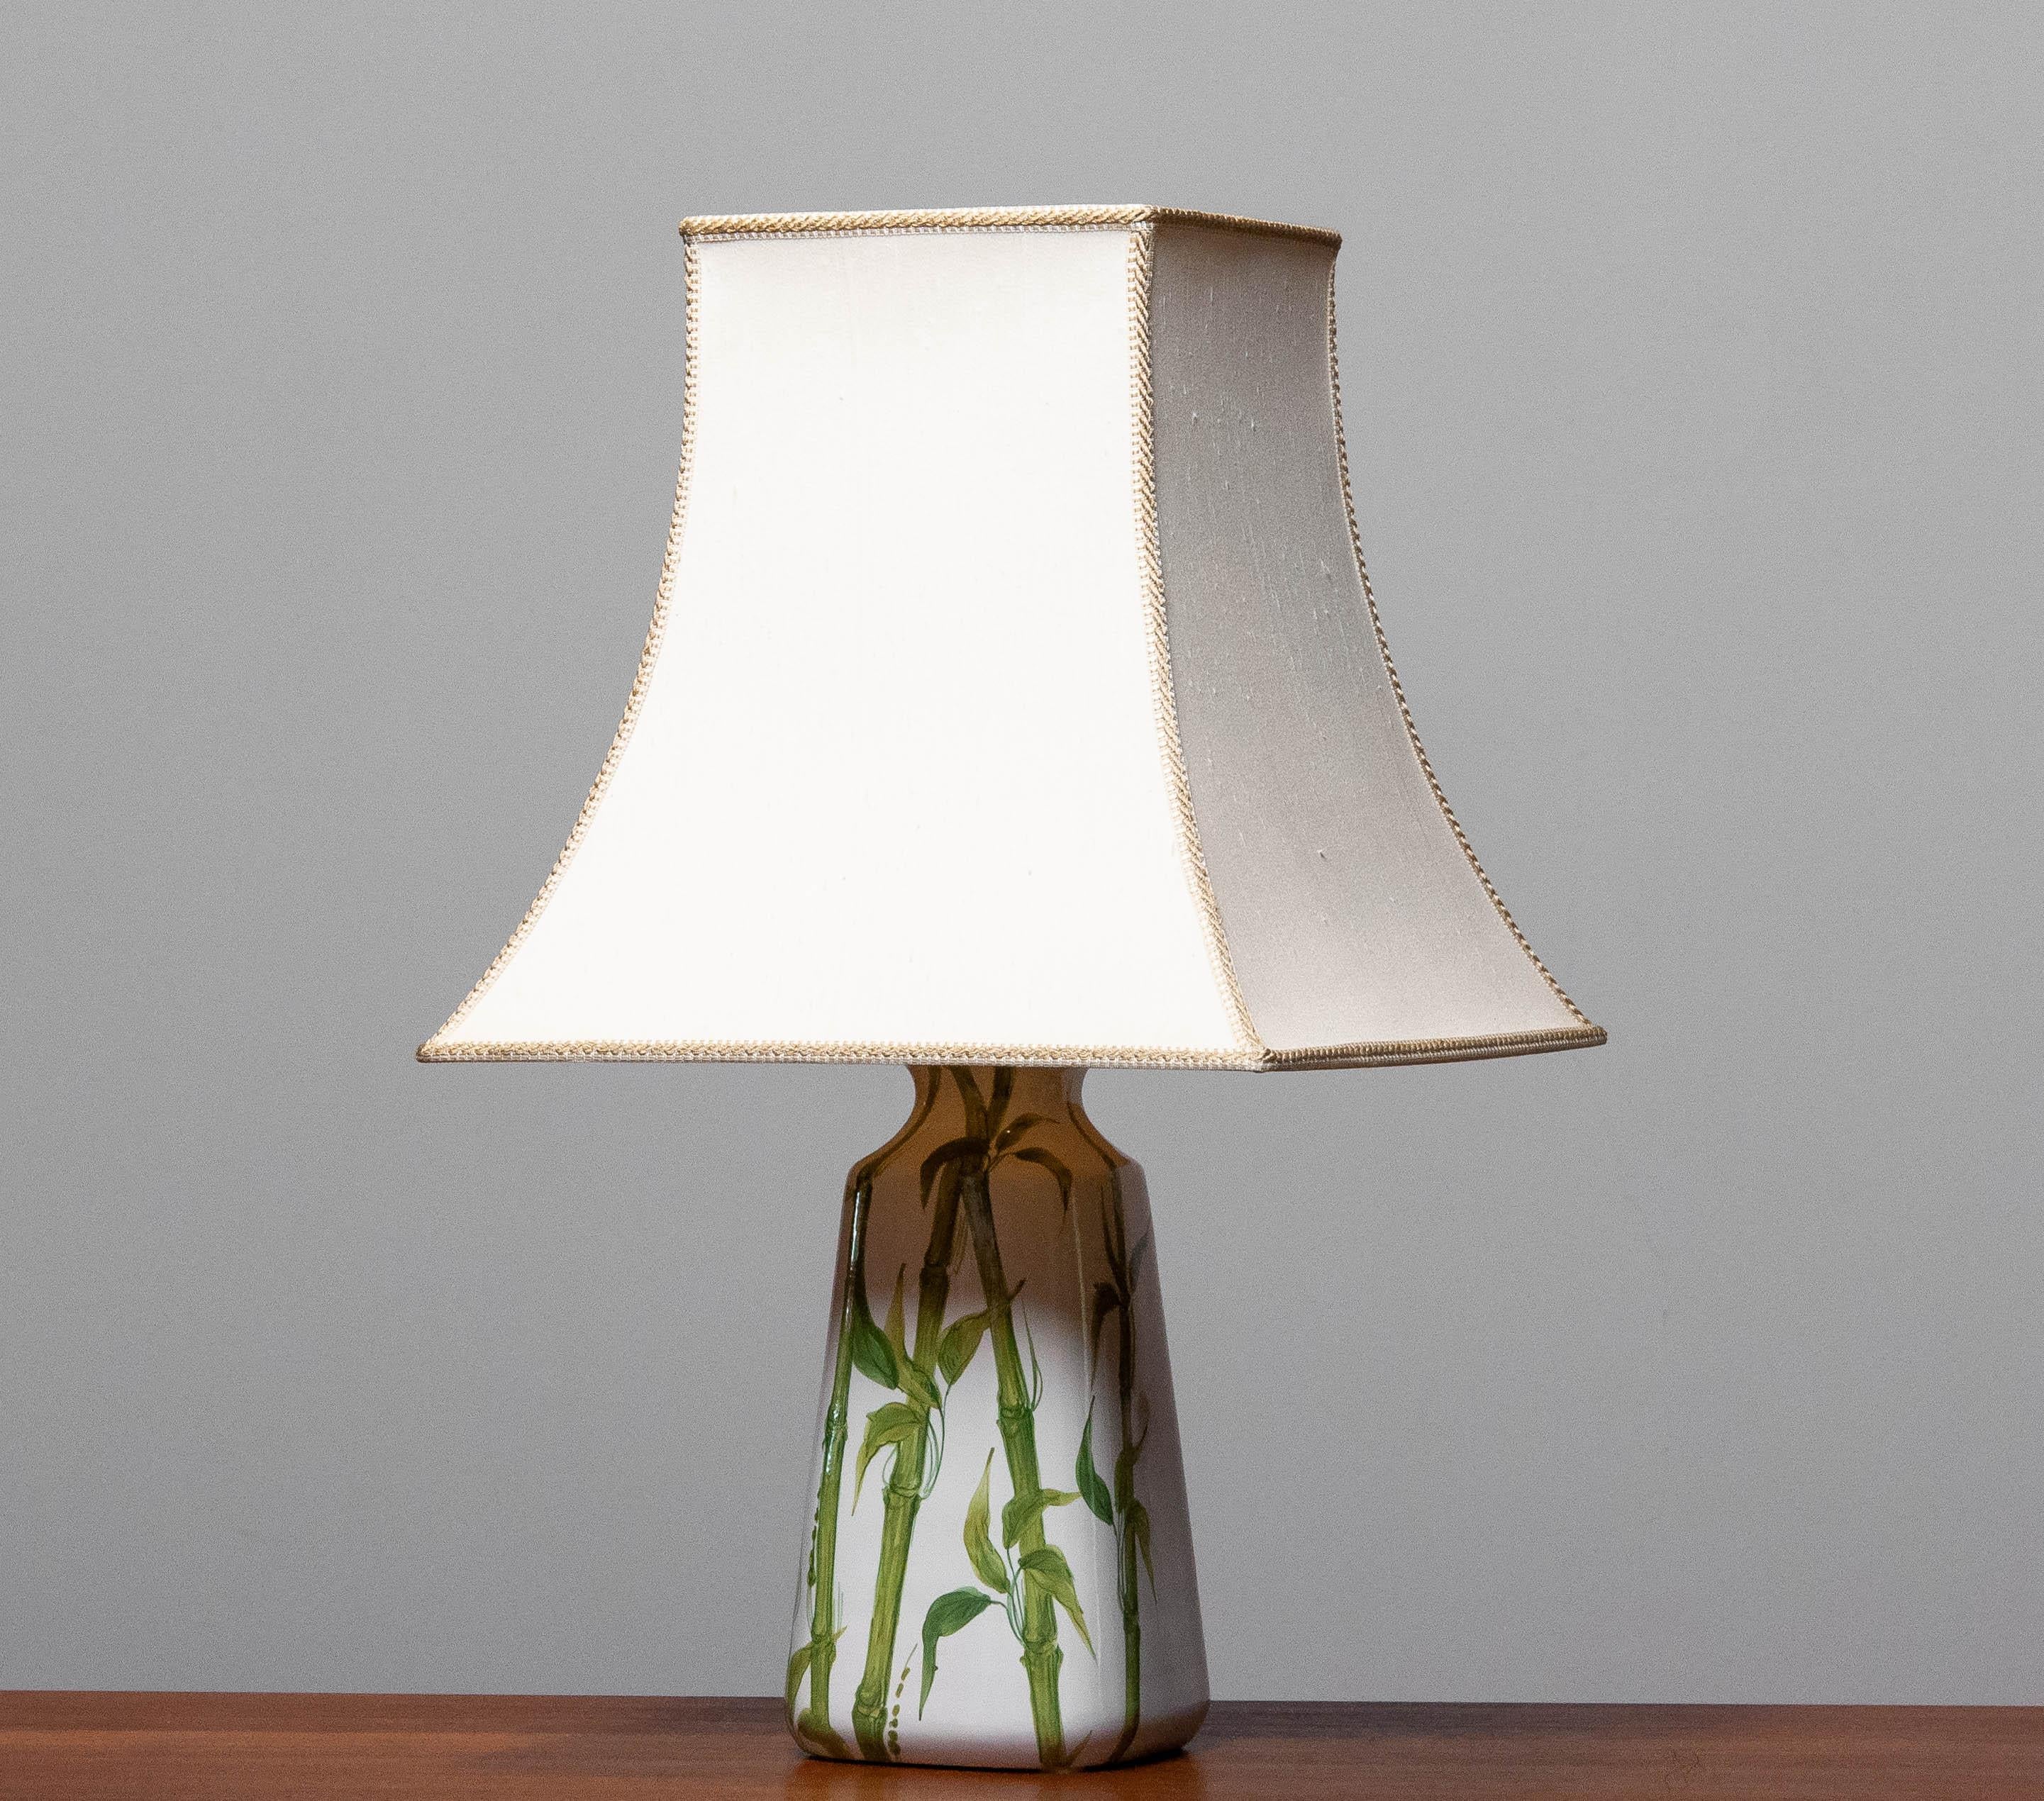 Beautiful 1960's white ceramic table lamps made in Italy and hand painted with bamboo decor. The lamp is in perfect condition. The lamp is numbered as style VII and labeled.
The screw fitting is from a later period. 
Allover this lamp is in very